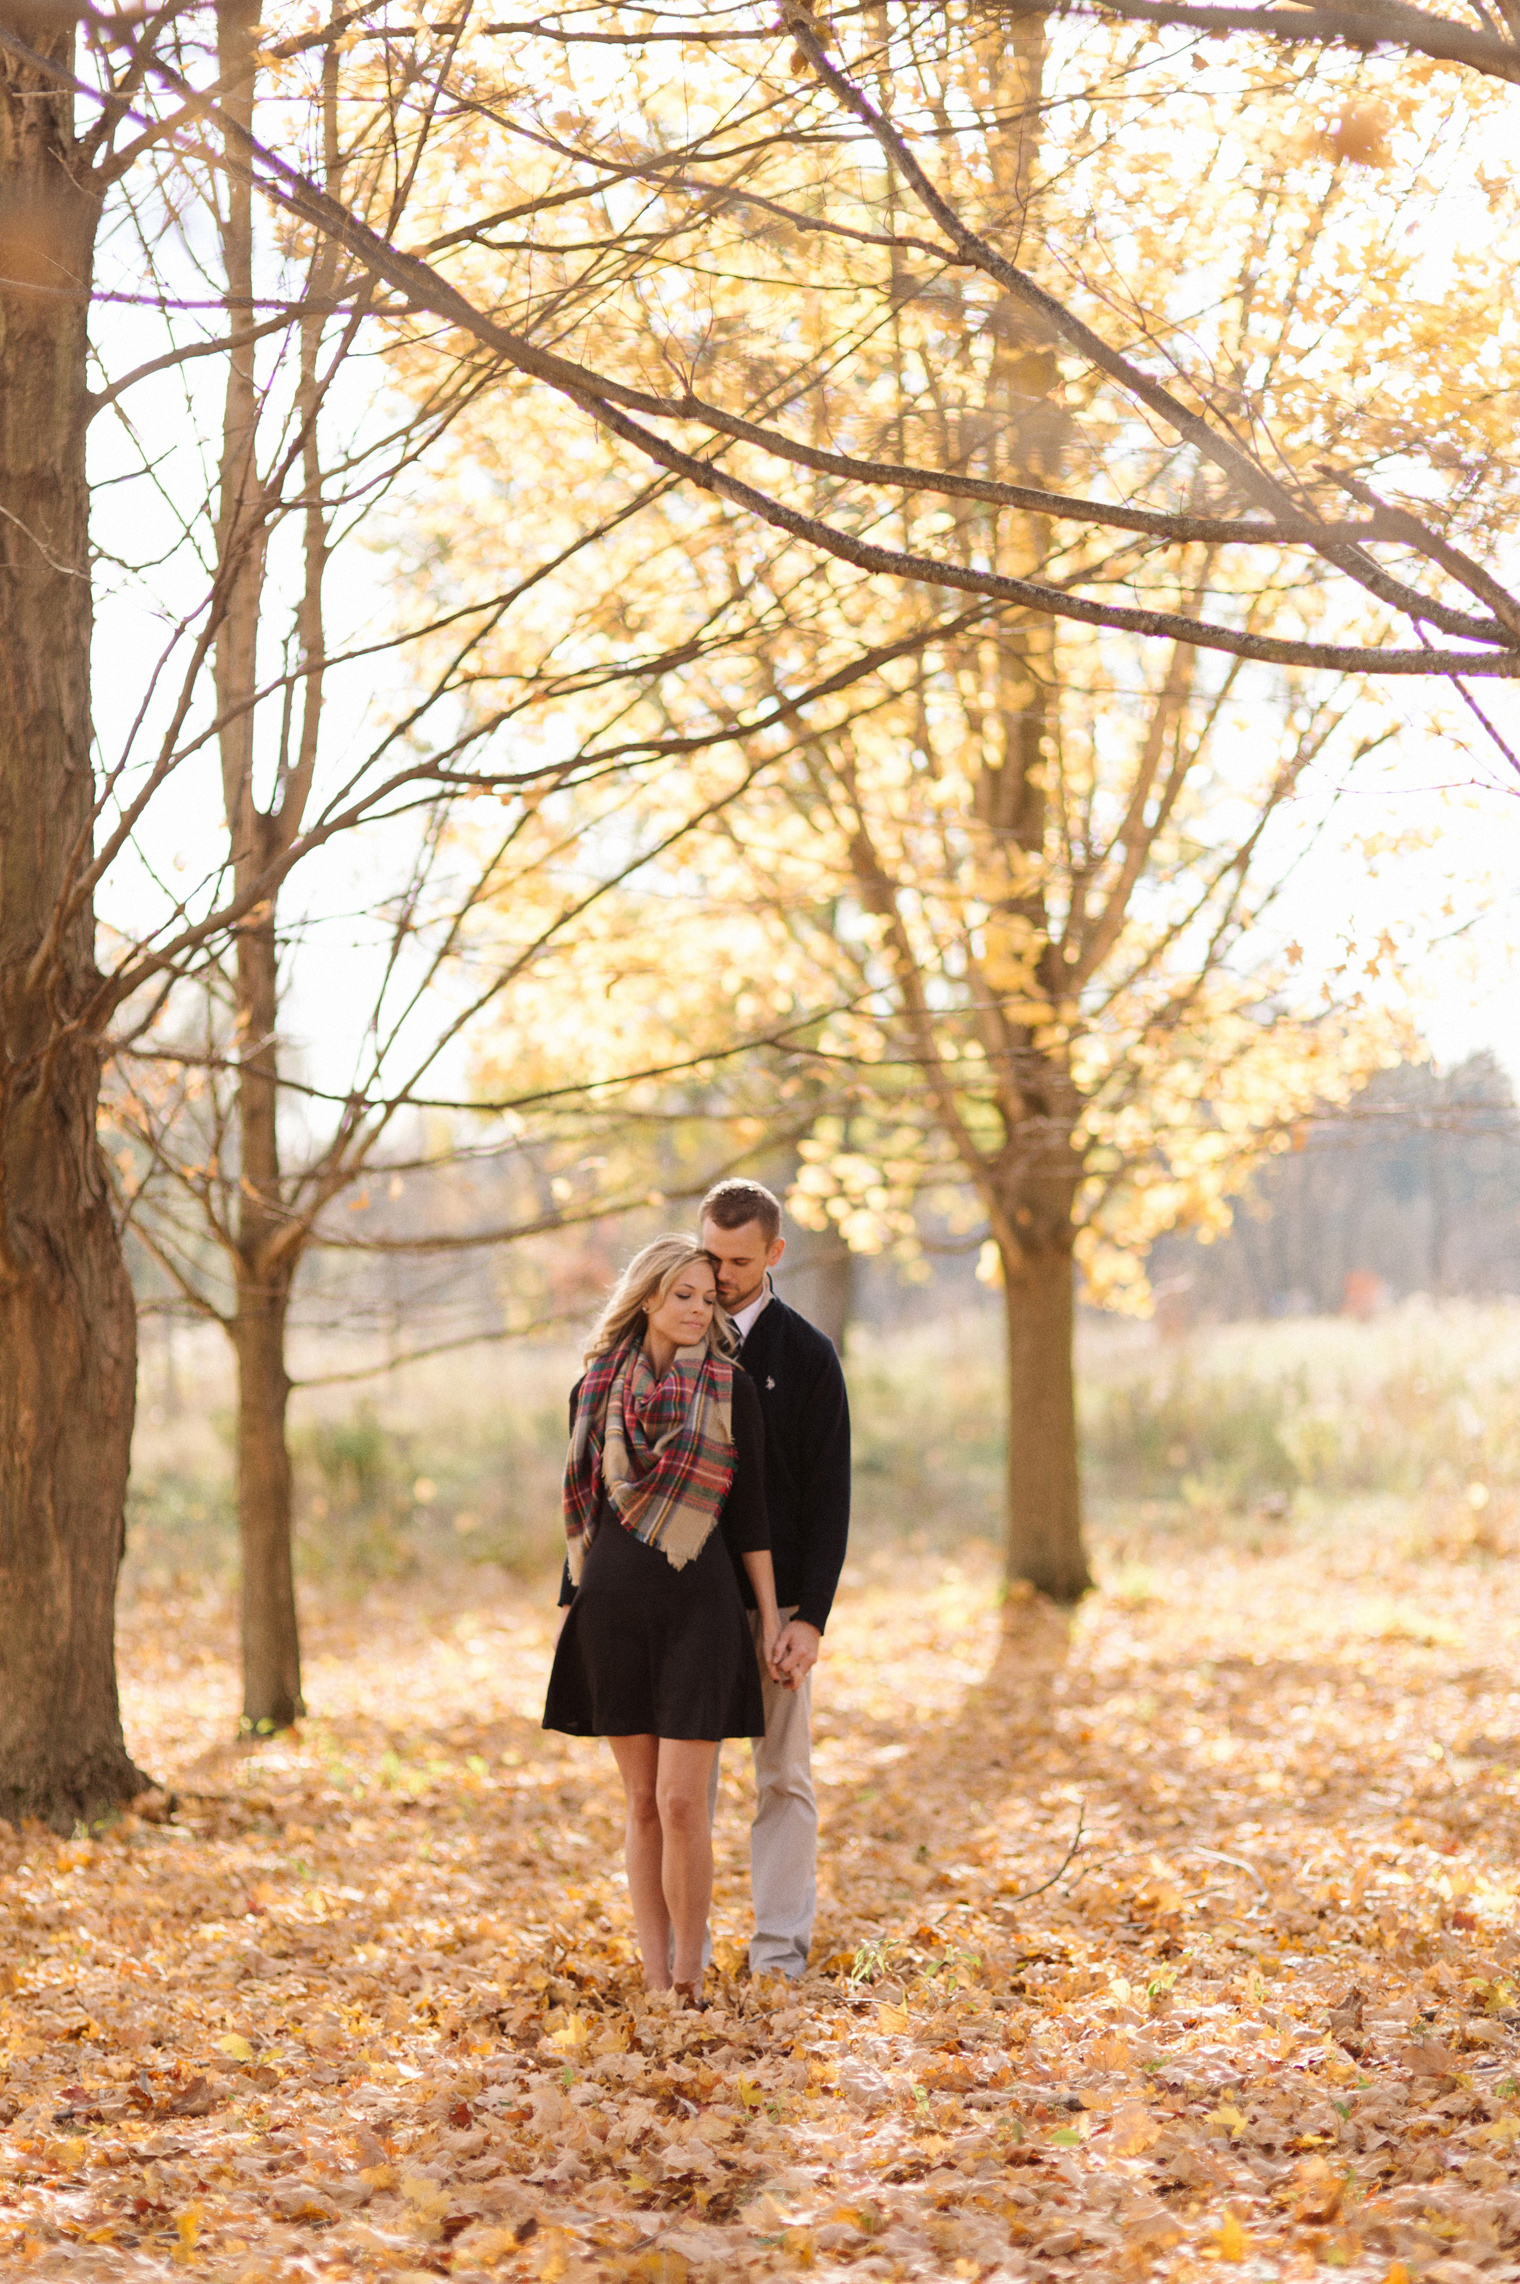 Bright orange and tell fall foliage at a fall couples photography session at the Ann Arbor Botanical Gardens by wedding photographer Heather Jowett